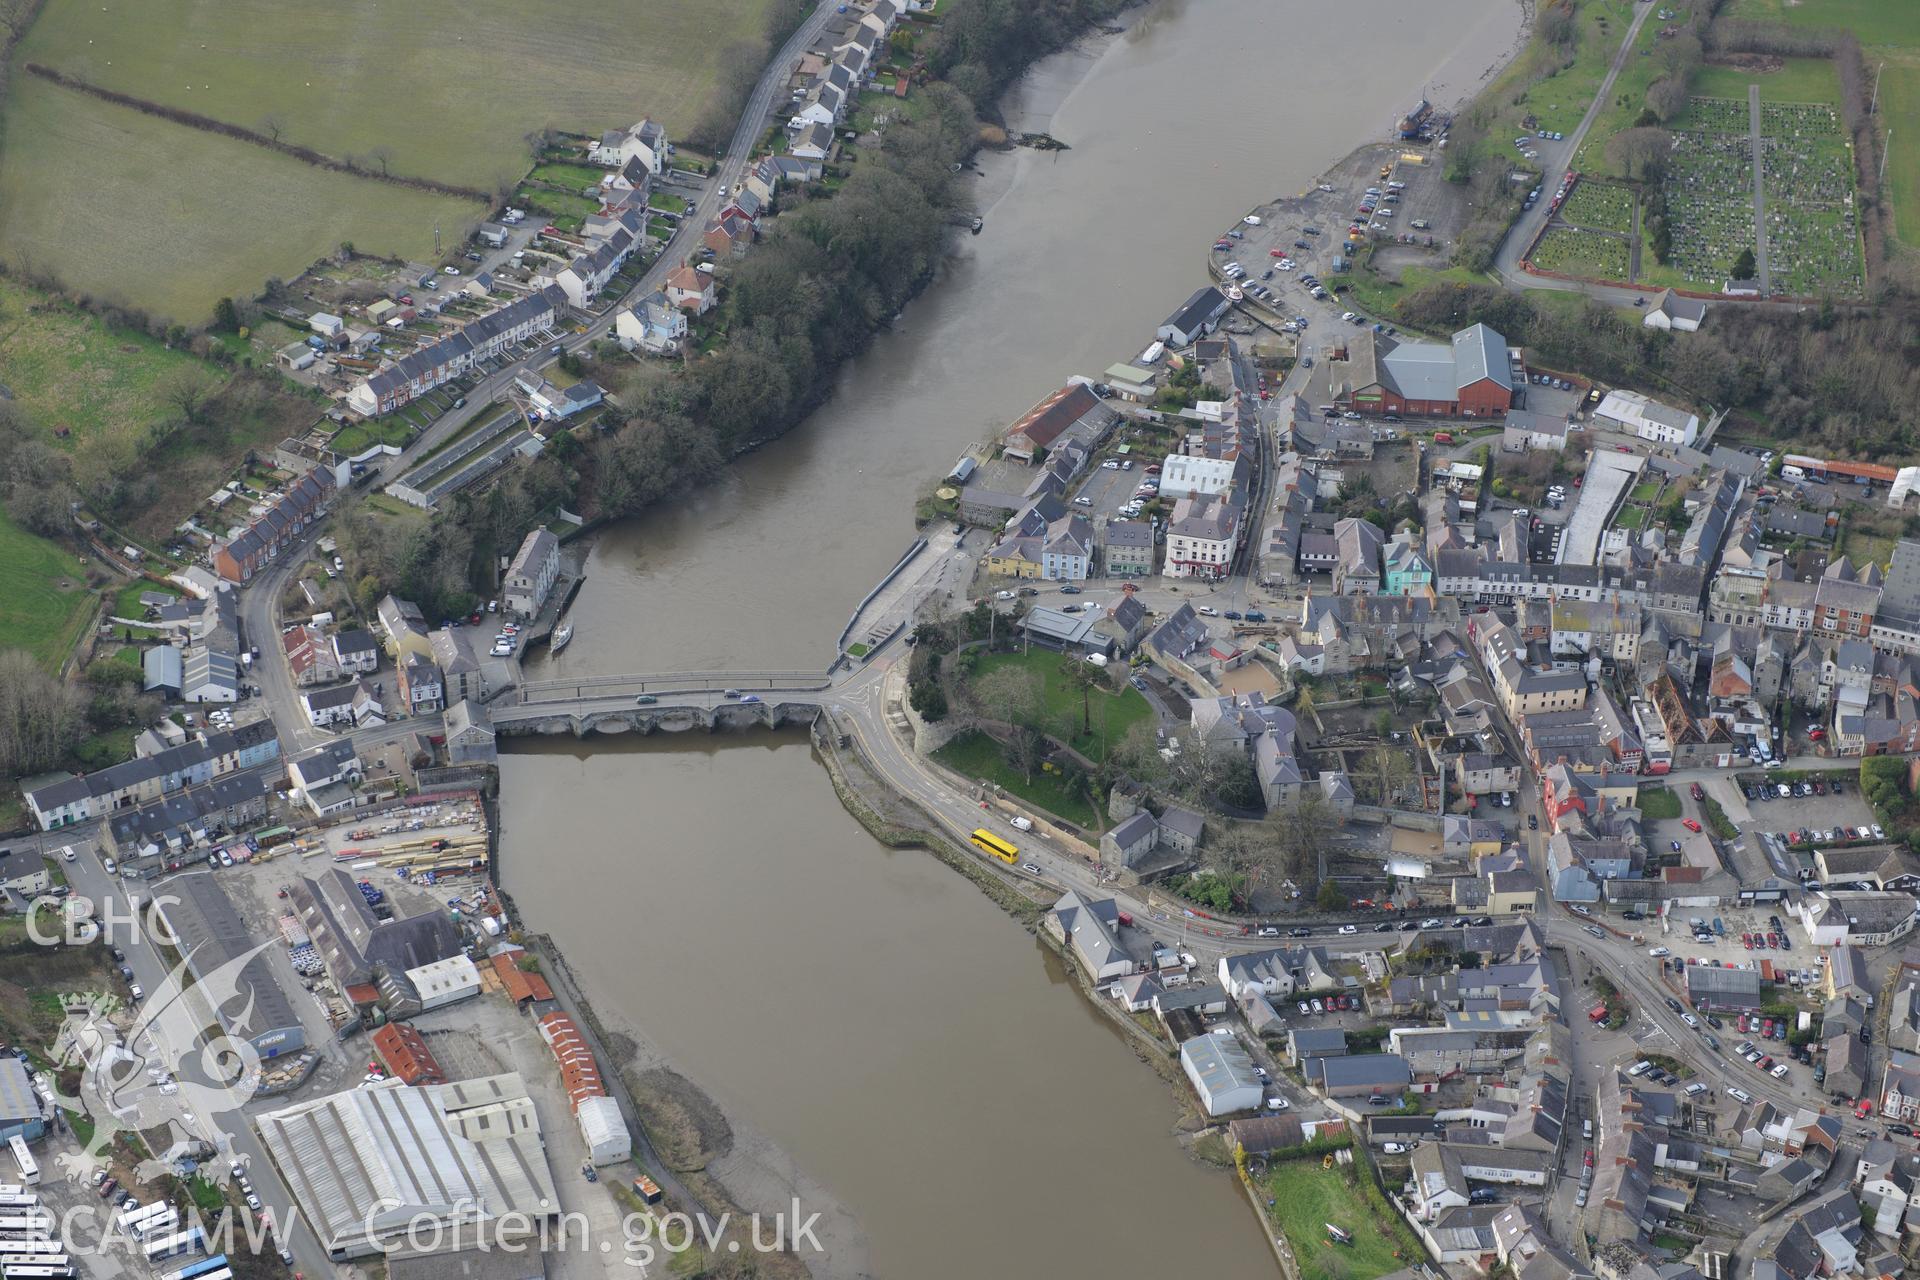 Cardigan castle and castle house; Cardigan bridge; sawmill; Bridgend foundry; Baillie's foundry, Cardigan. Oblique aerial photograph taken during the Royal Commission's programme of archaeological aerial reconnaissance by Toby Driver on 13th March 2015.